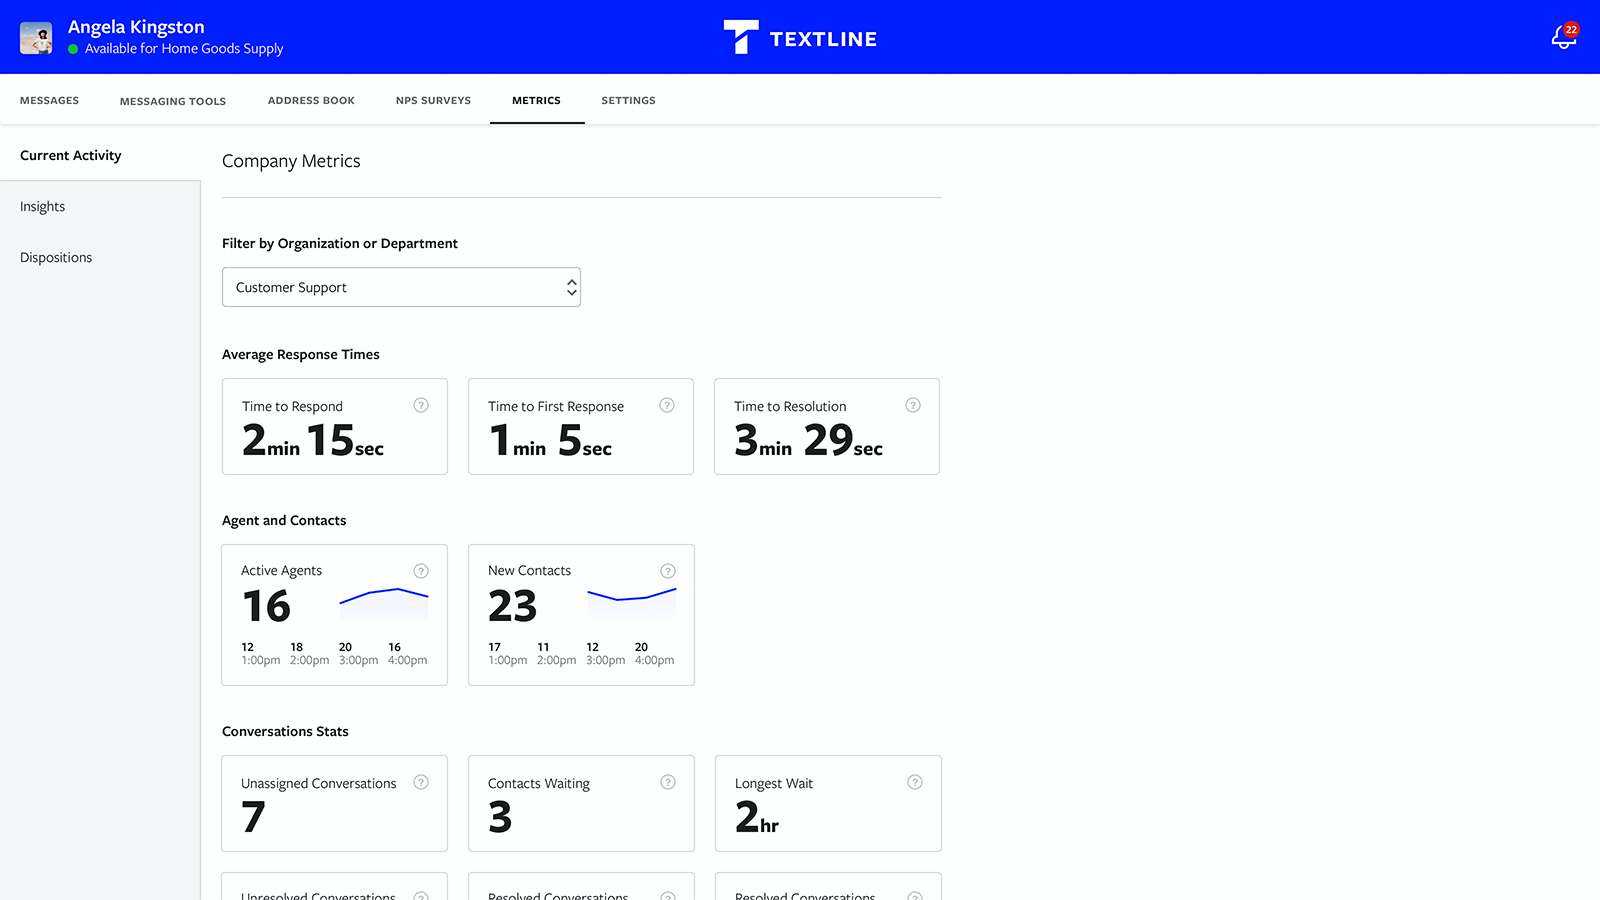 Learn through metrics and coach your team with data-driven insights.